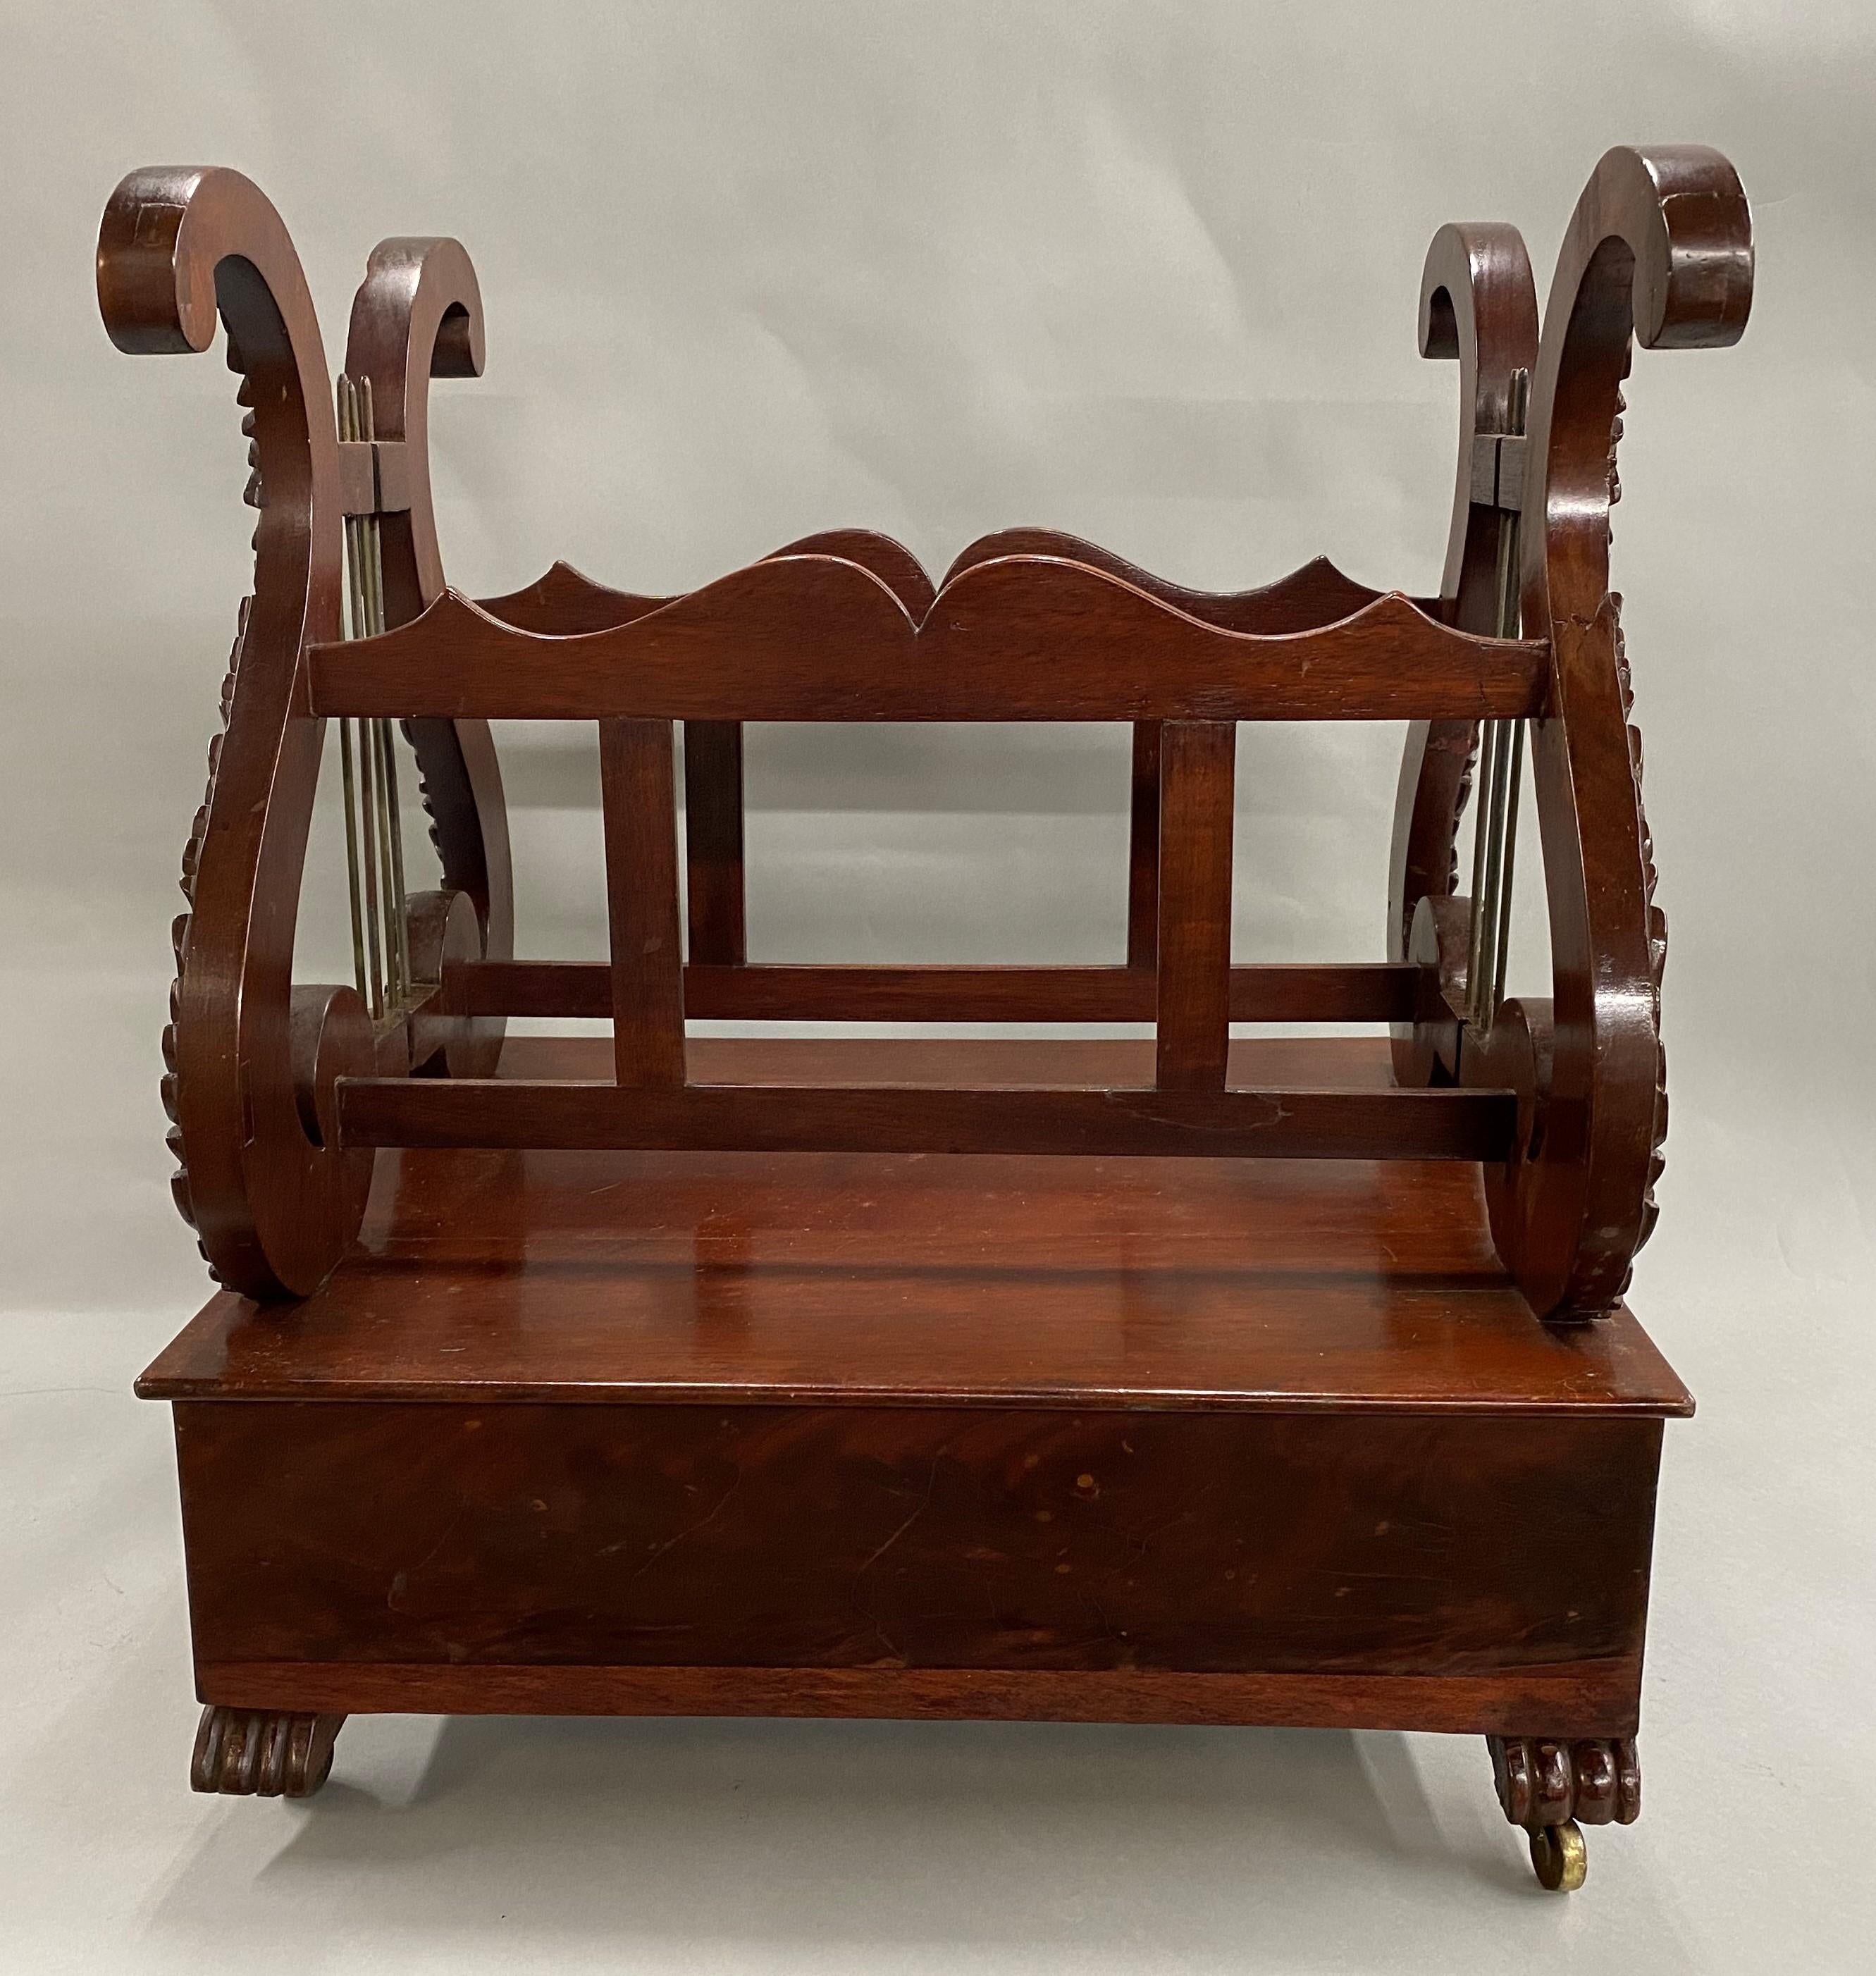 A fine classical Empire Canterbury, featuring heavily carved lyre ends with rosettes and brass strings, with nicely shaped stretchers above a crotched mahogany veneered case fitted with one long drawer and one false drawer facade all raised by four